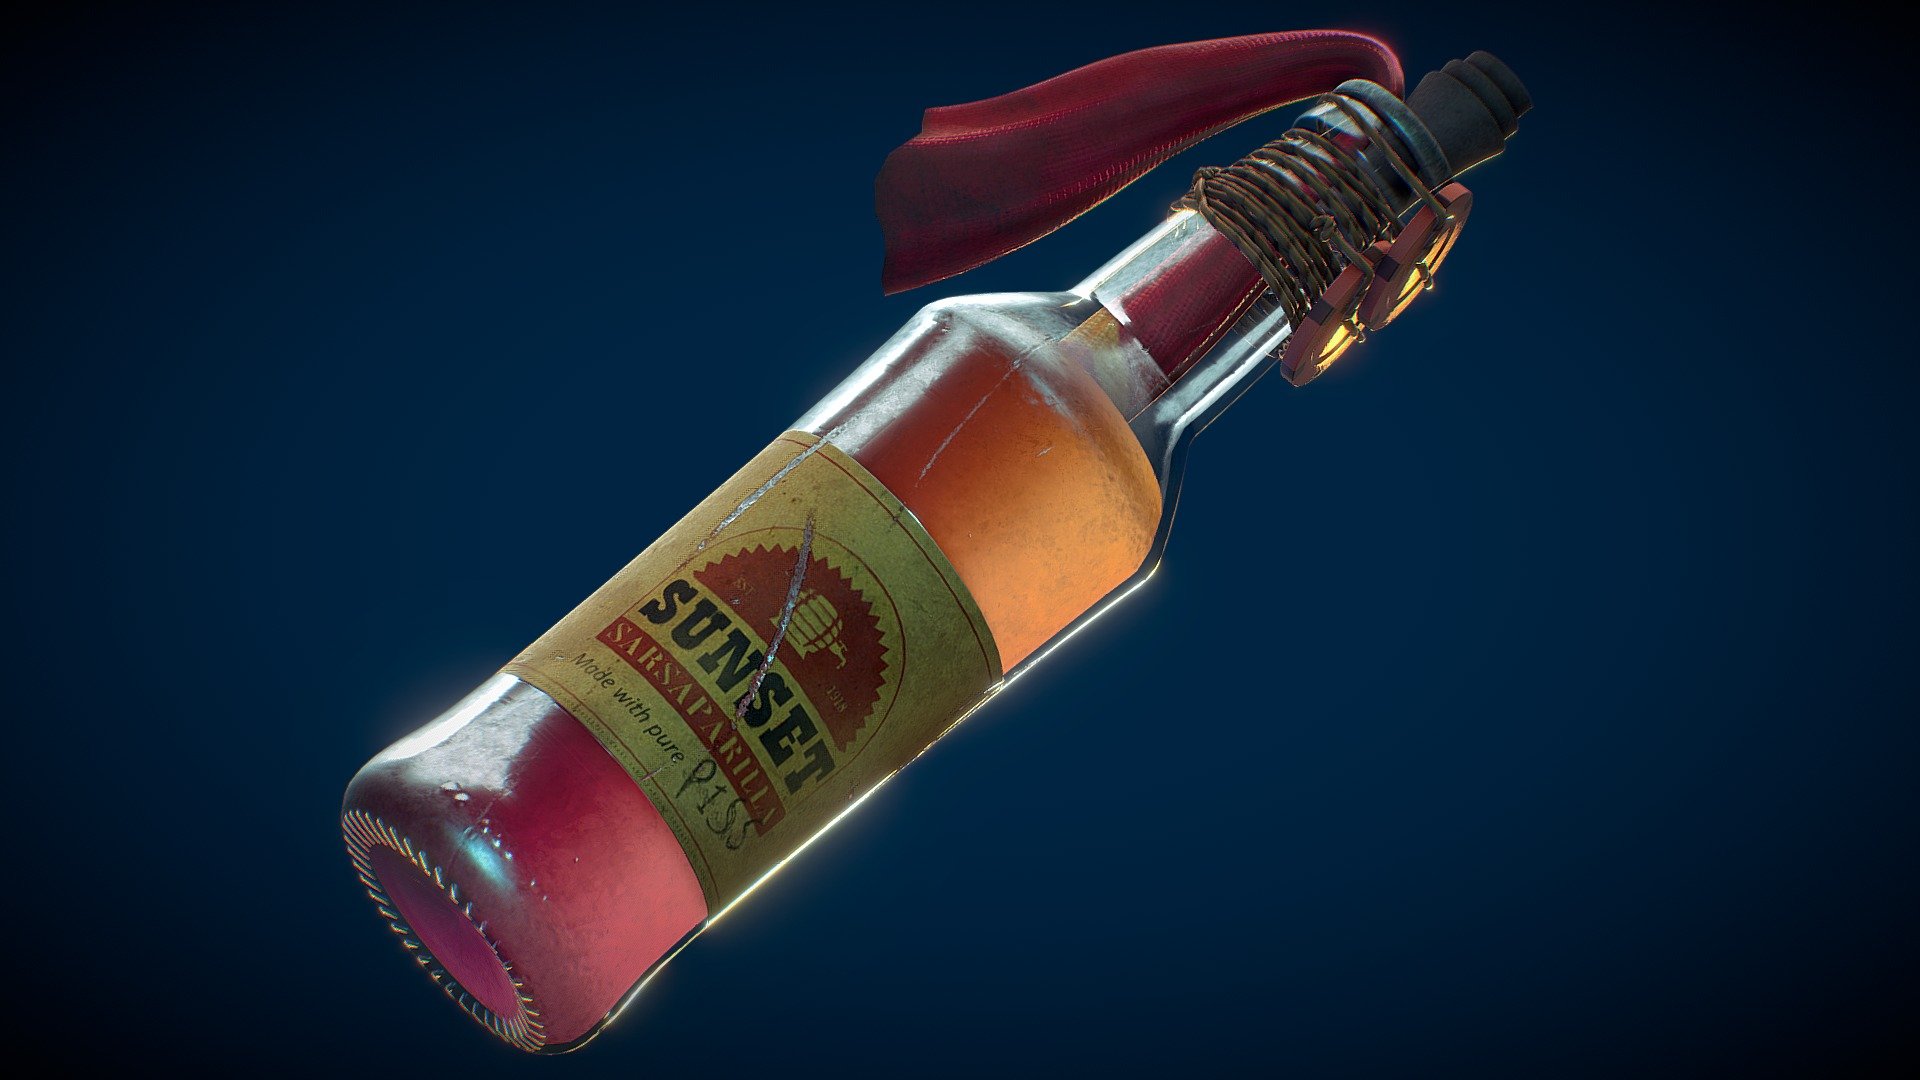 This is my own take on the Fire Bomb from the Fallout series.
Its made of a Sunset Sarsaparilla bottle, legion flag fabric and TOPS Casino chips.

Click me for more pictures

PBR / 2K Textures - Fanart - Fallout - Fire Bomb - 3D model by Sebastian Irmer (@.sebastian.) 3d model